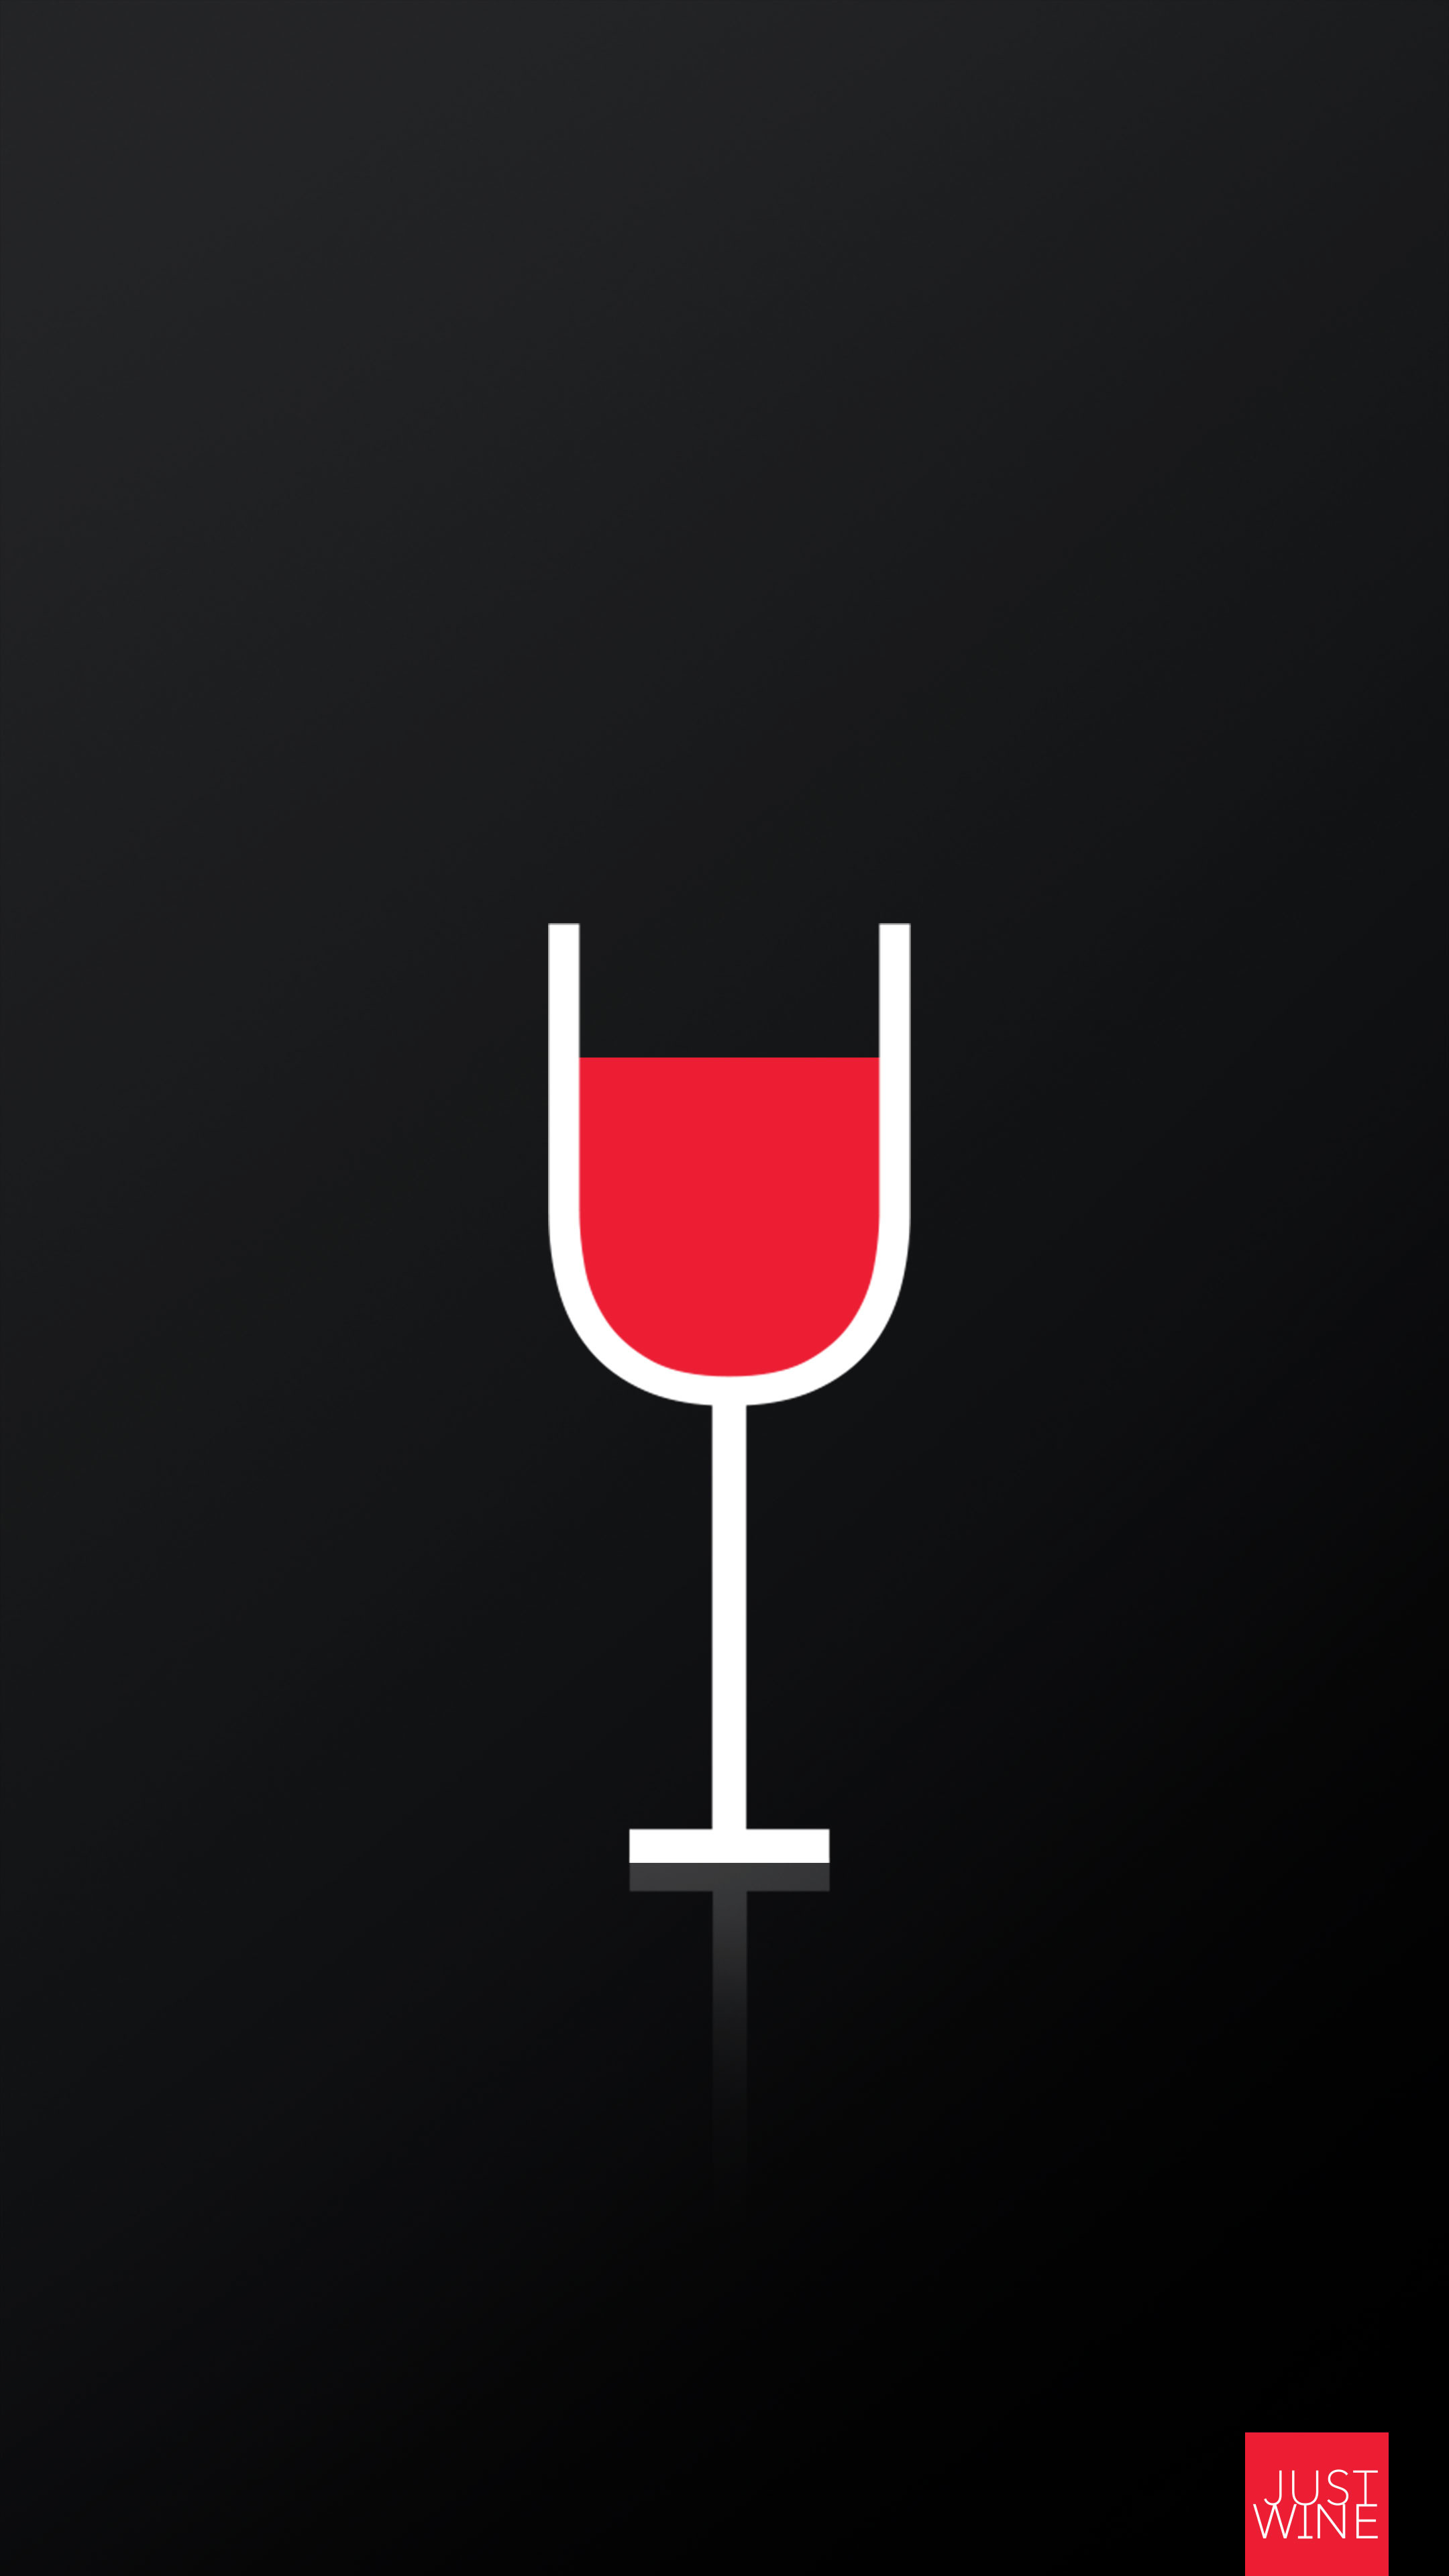 2160x3840 just-wine-mobile-wallpaper-background-iphone-red ...